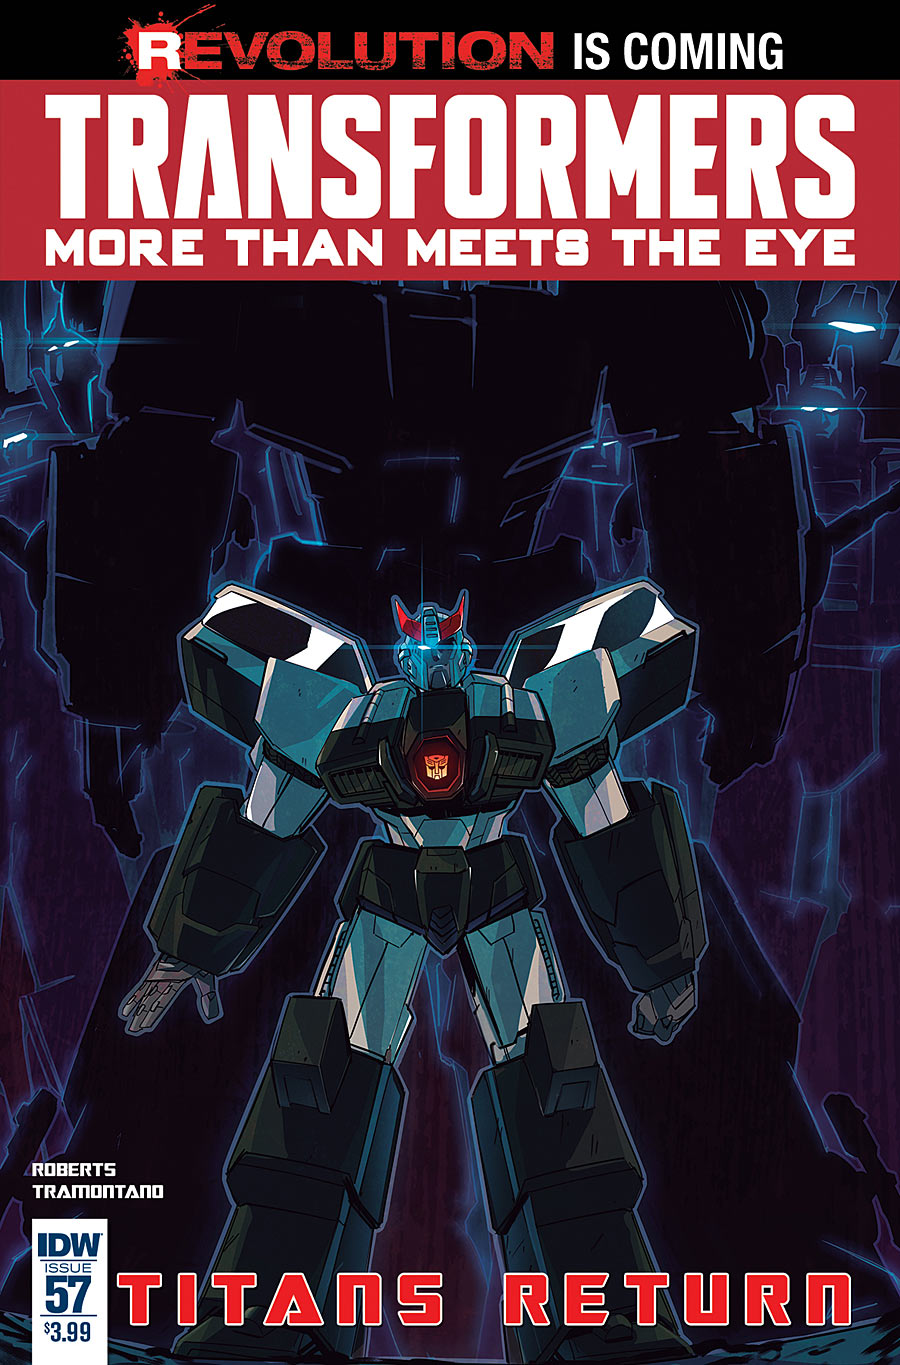 Transformers: More Than Meets the Eye #57